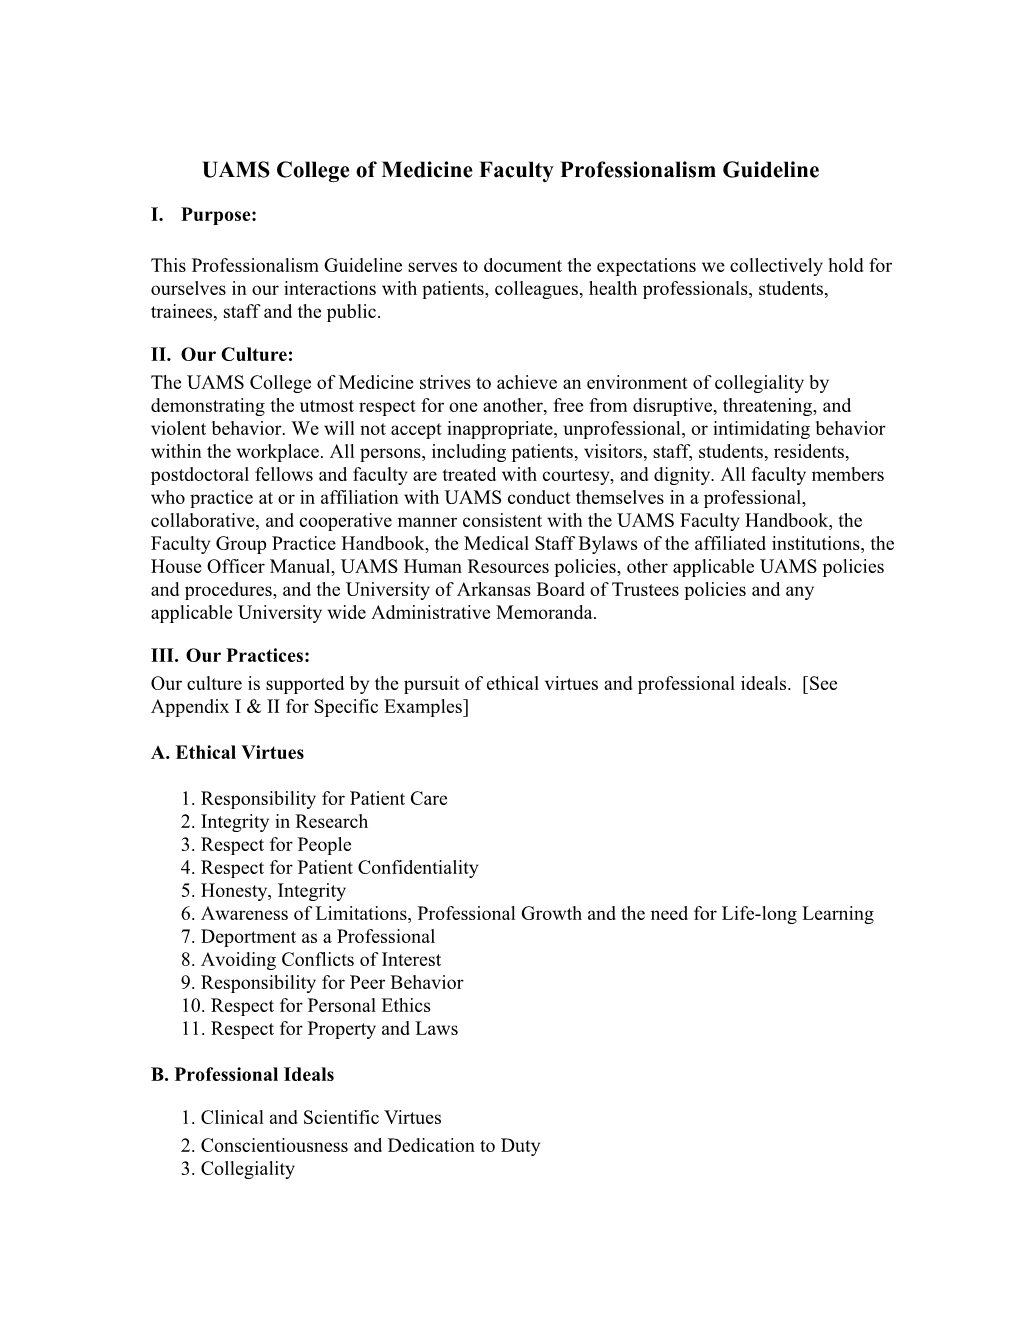 UAMS Professional Code of Conduct Policy